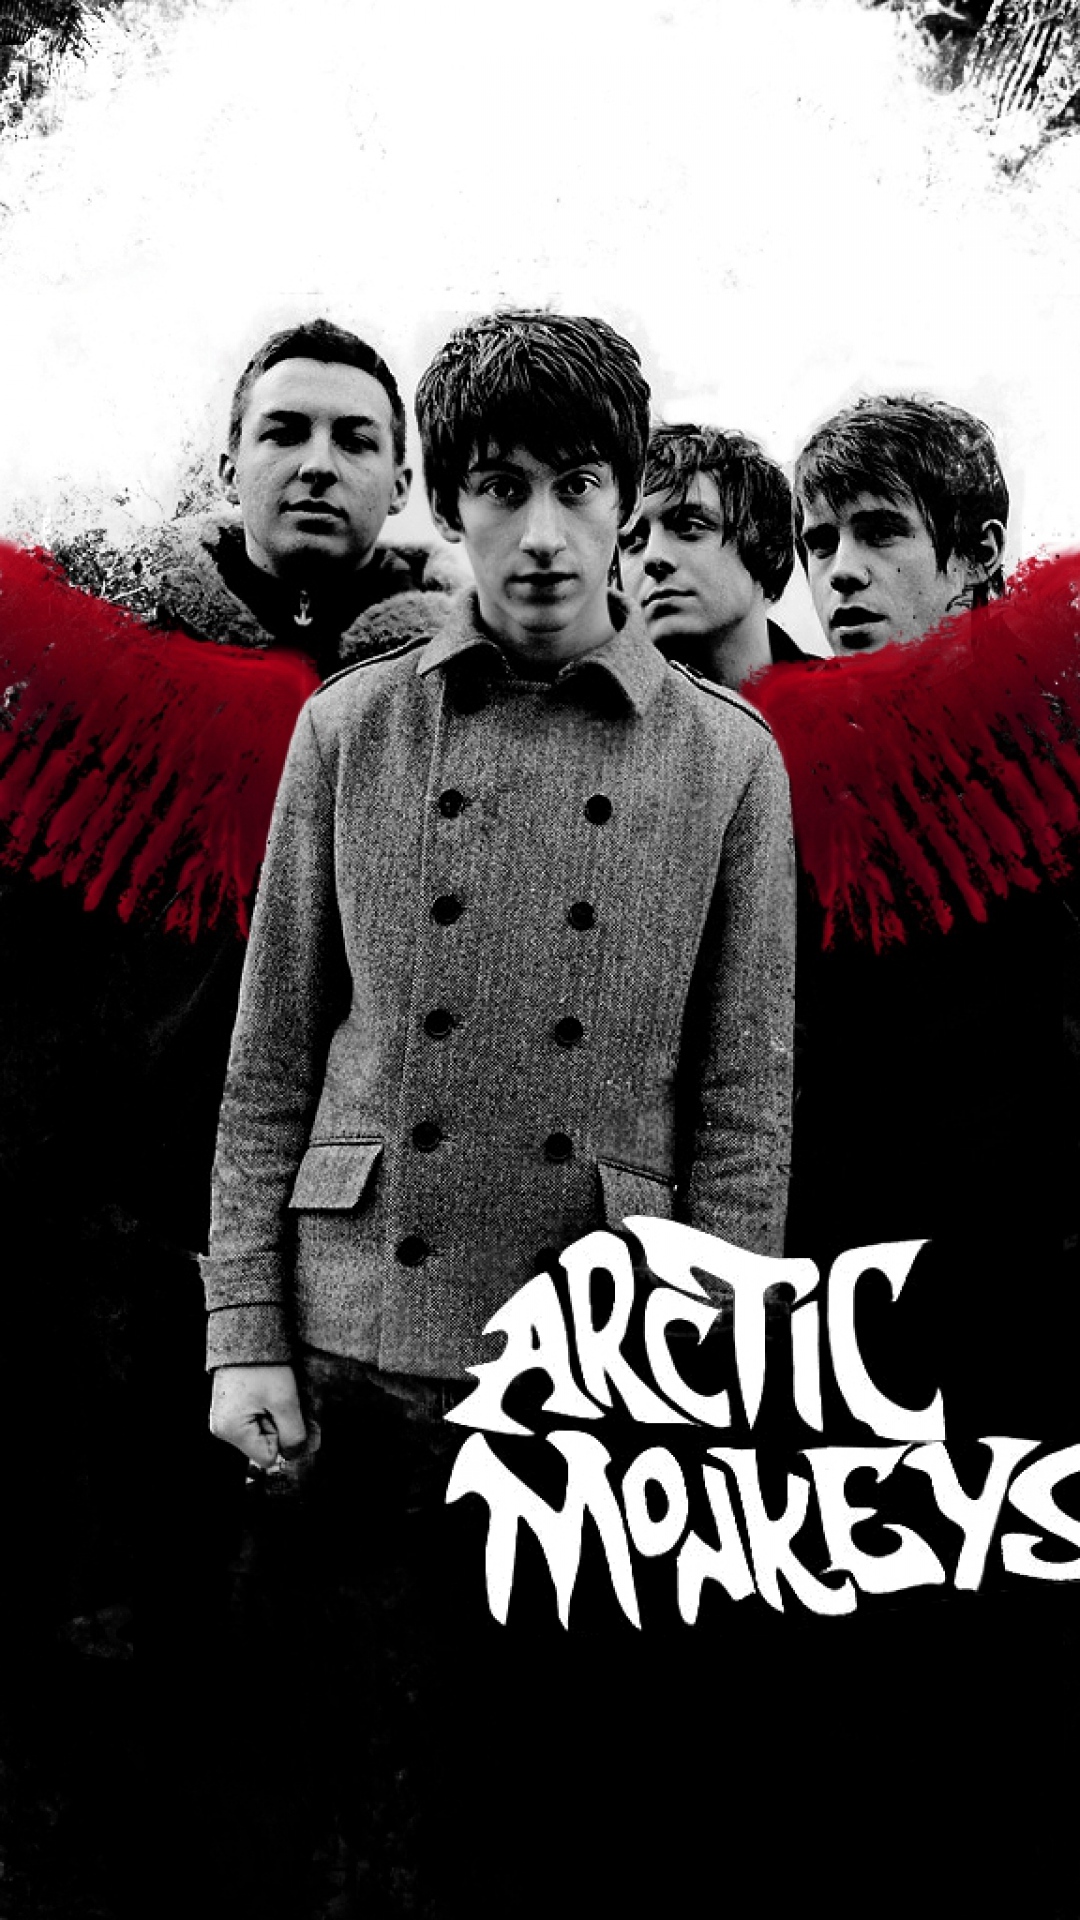 arctic monkeys iphone wallpaper,album cover,font,poster,movie,outerwear